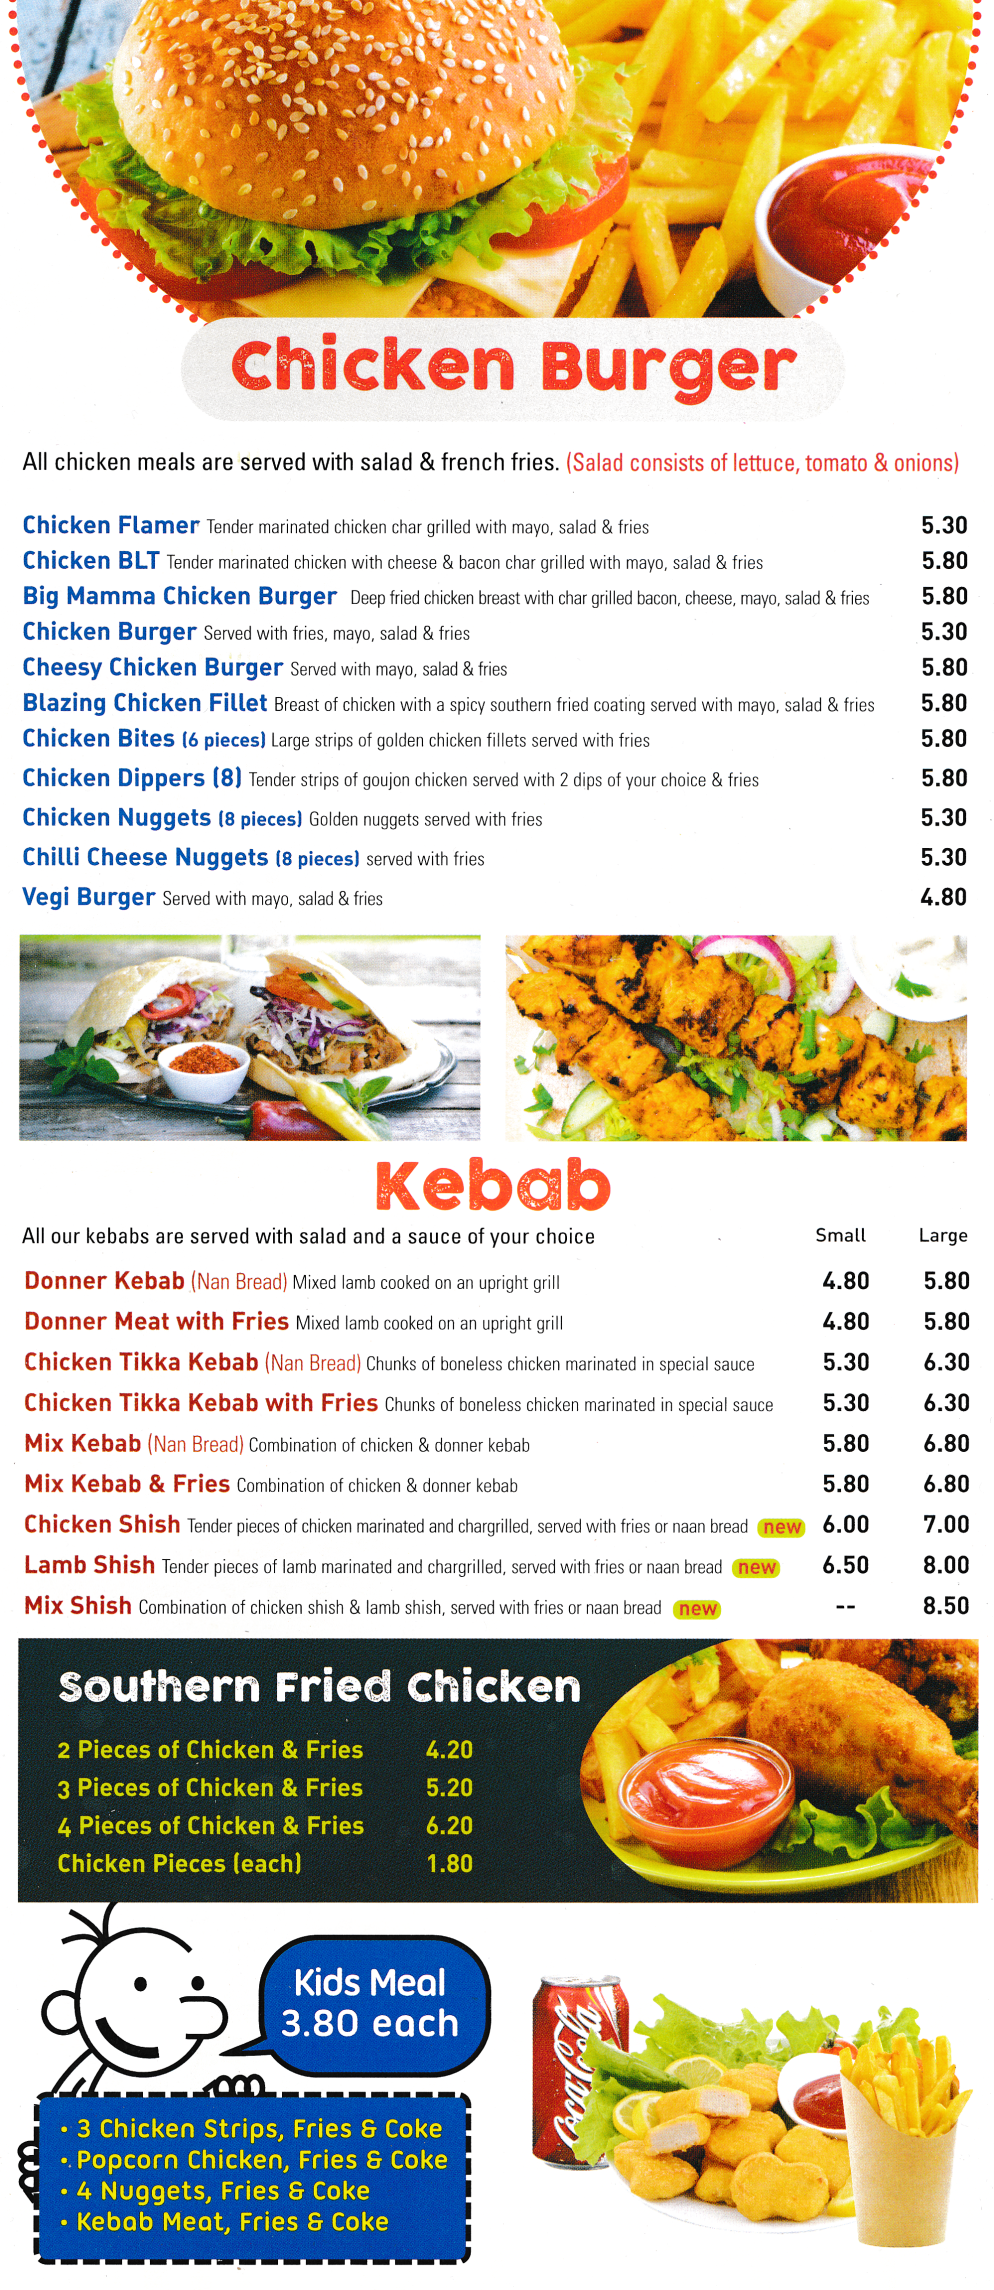 Menu for Pizza Pasta - Chicken Burgers, Southern Fried Chicken, Kebabs, Kids Meals..